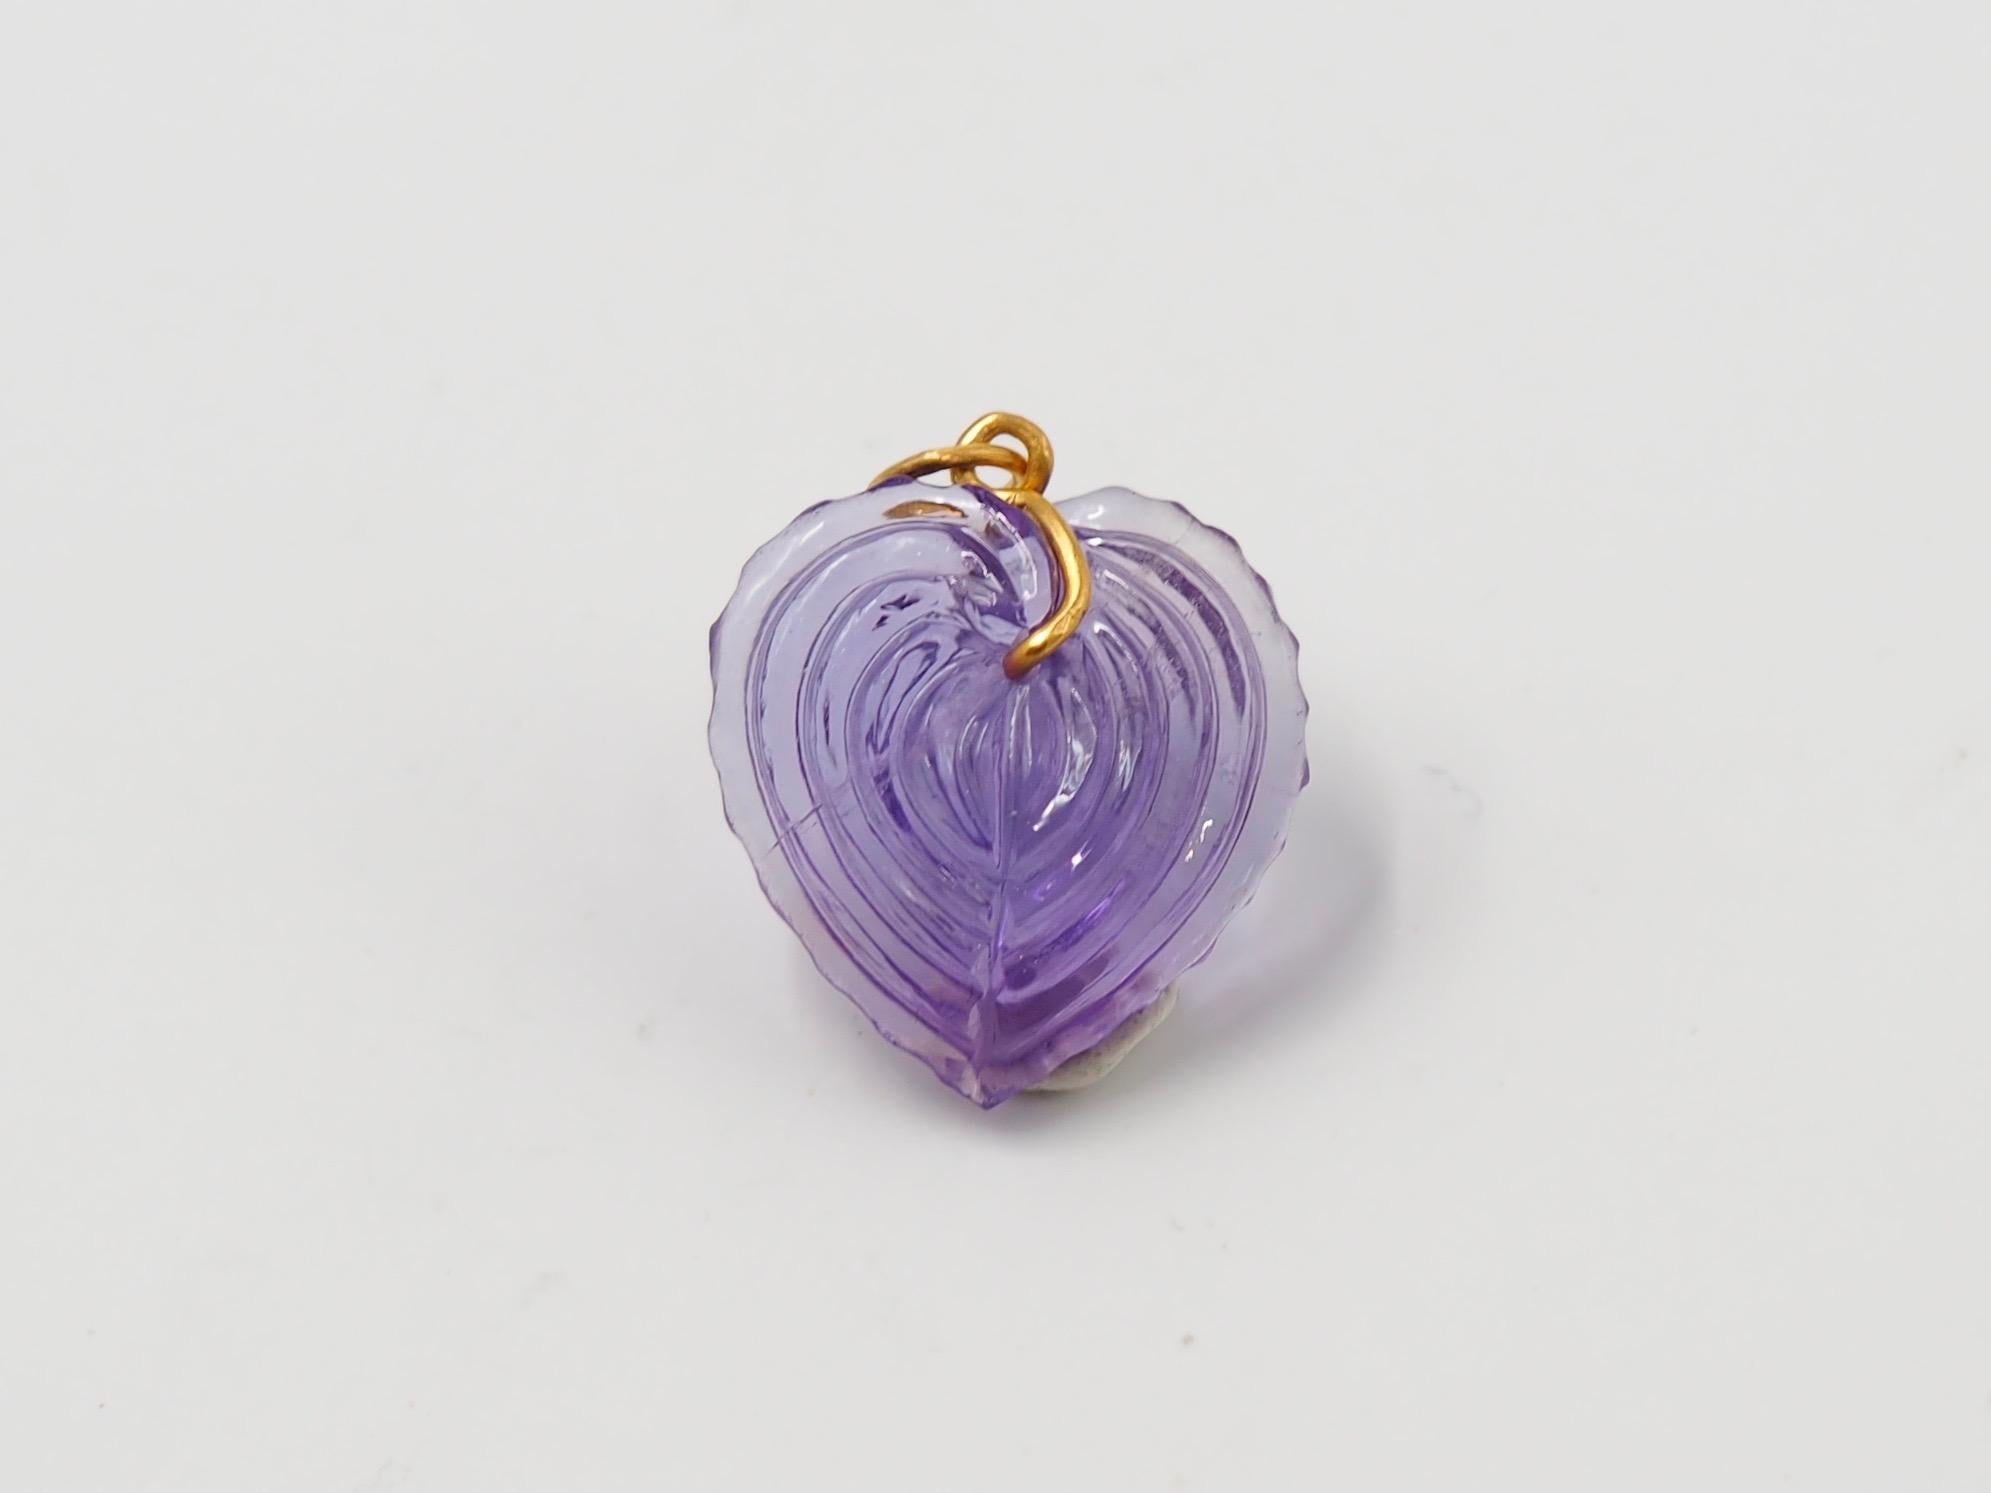 Hand-carved and handmade, this pendant represents a heart seashell in amethyst. The stone is simply drilled to allow a curved 22 karat gold wire that is twisted and finishes with a ring. 

2 sizes exist as you can see on one of the photo. This